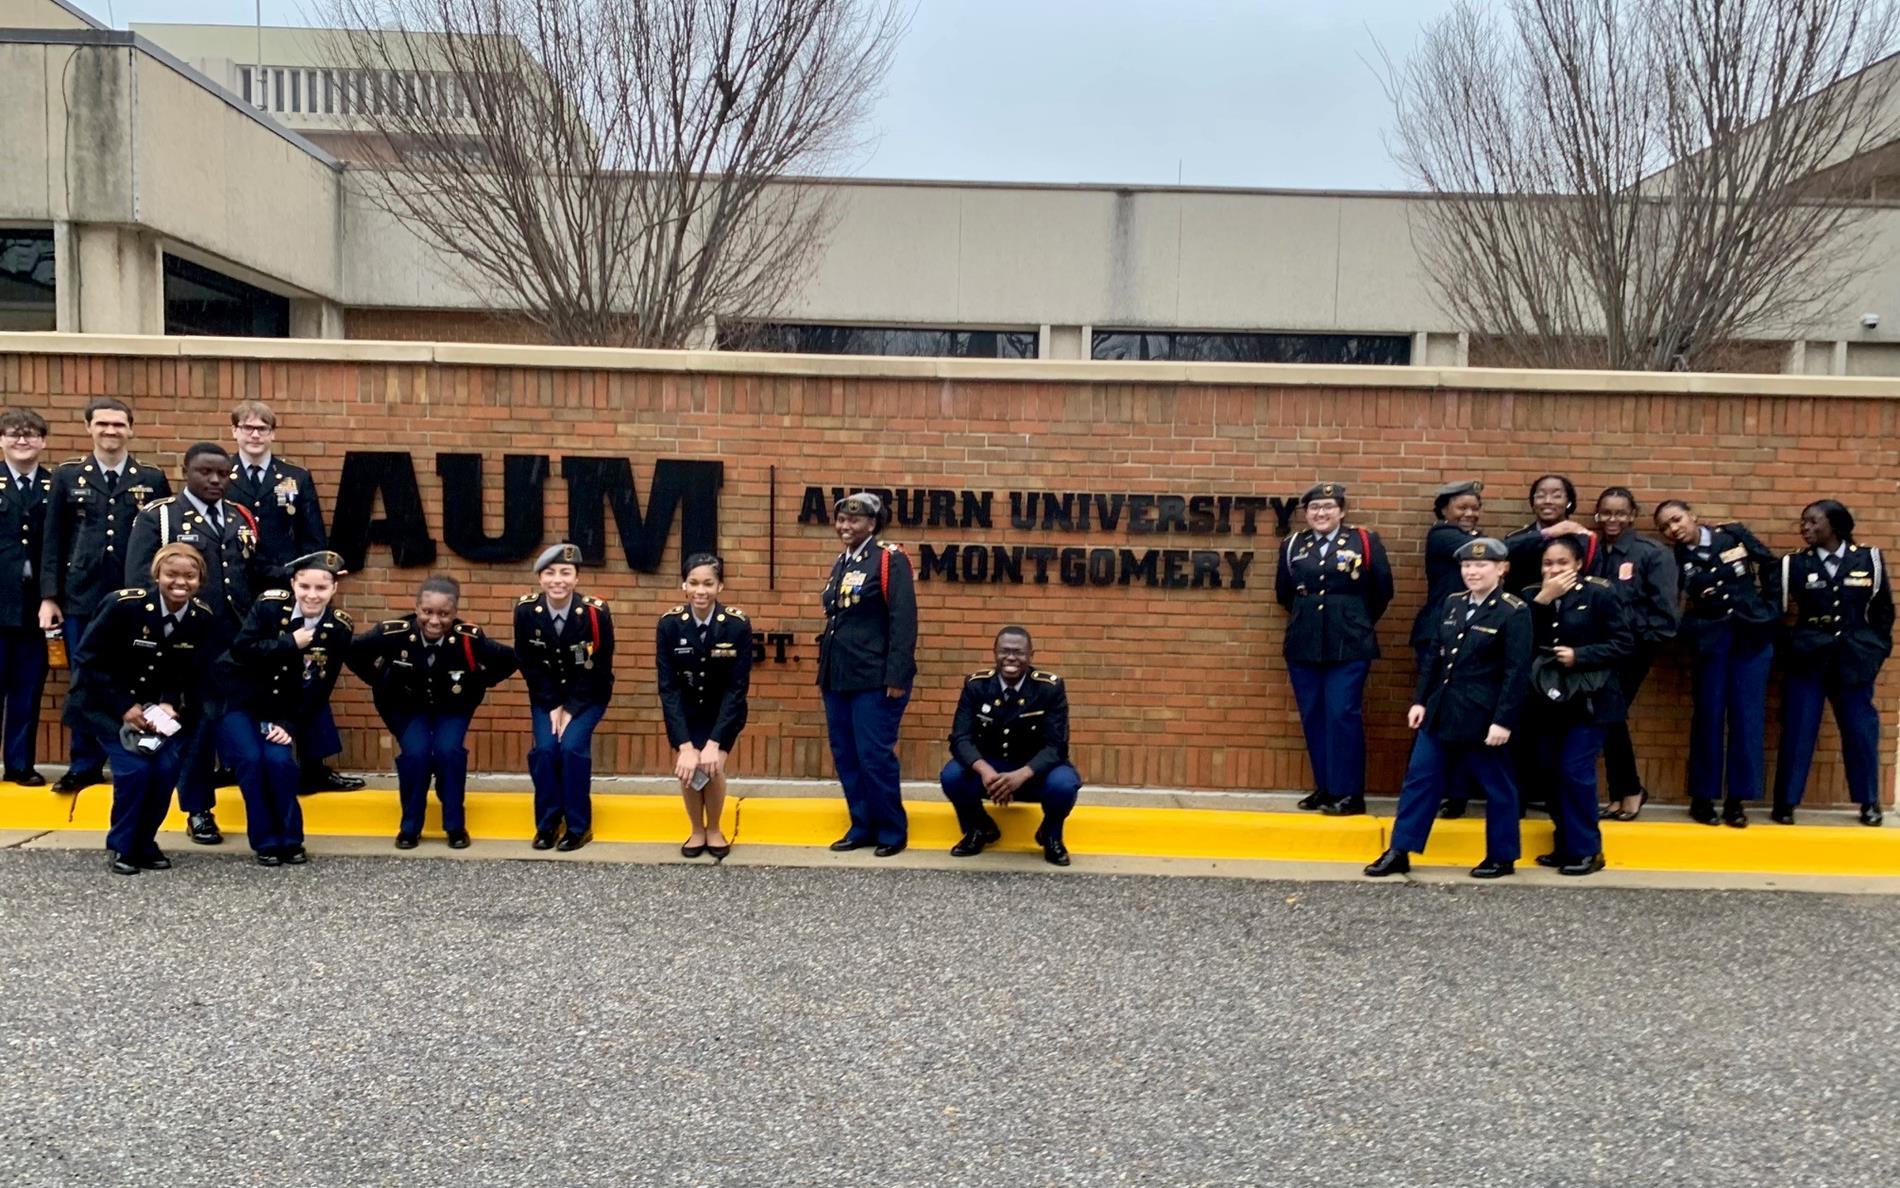 : Murphy and Blount JROTC cadets pose for a photo after receiving a tour of AUM campus by the ROTC Mustang Battalion in Montgomery, Alabama.